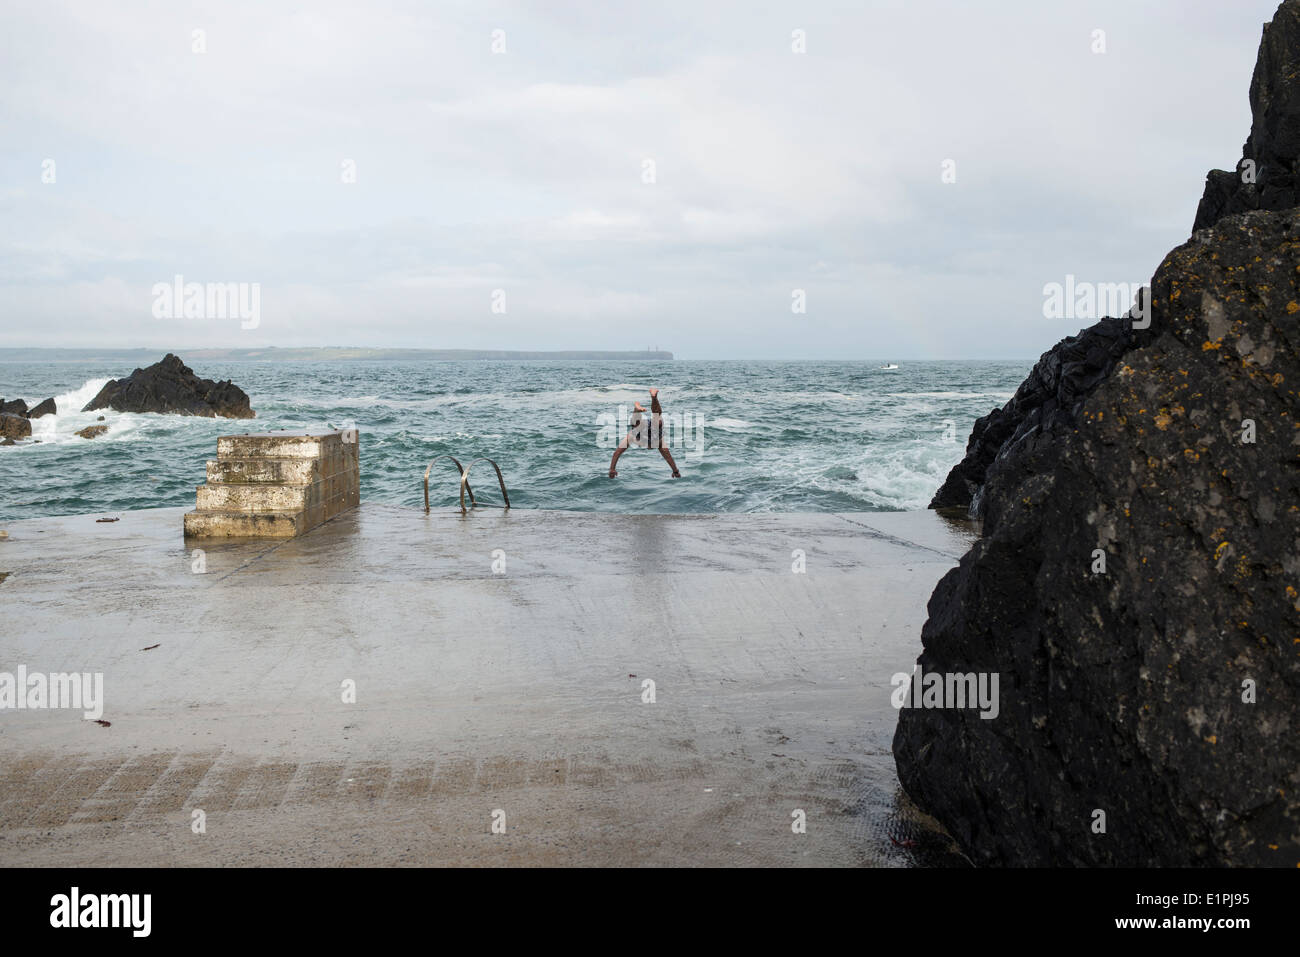 Man dives form the swimming platform, Newtown Cove, Ireland Stock Photo